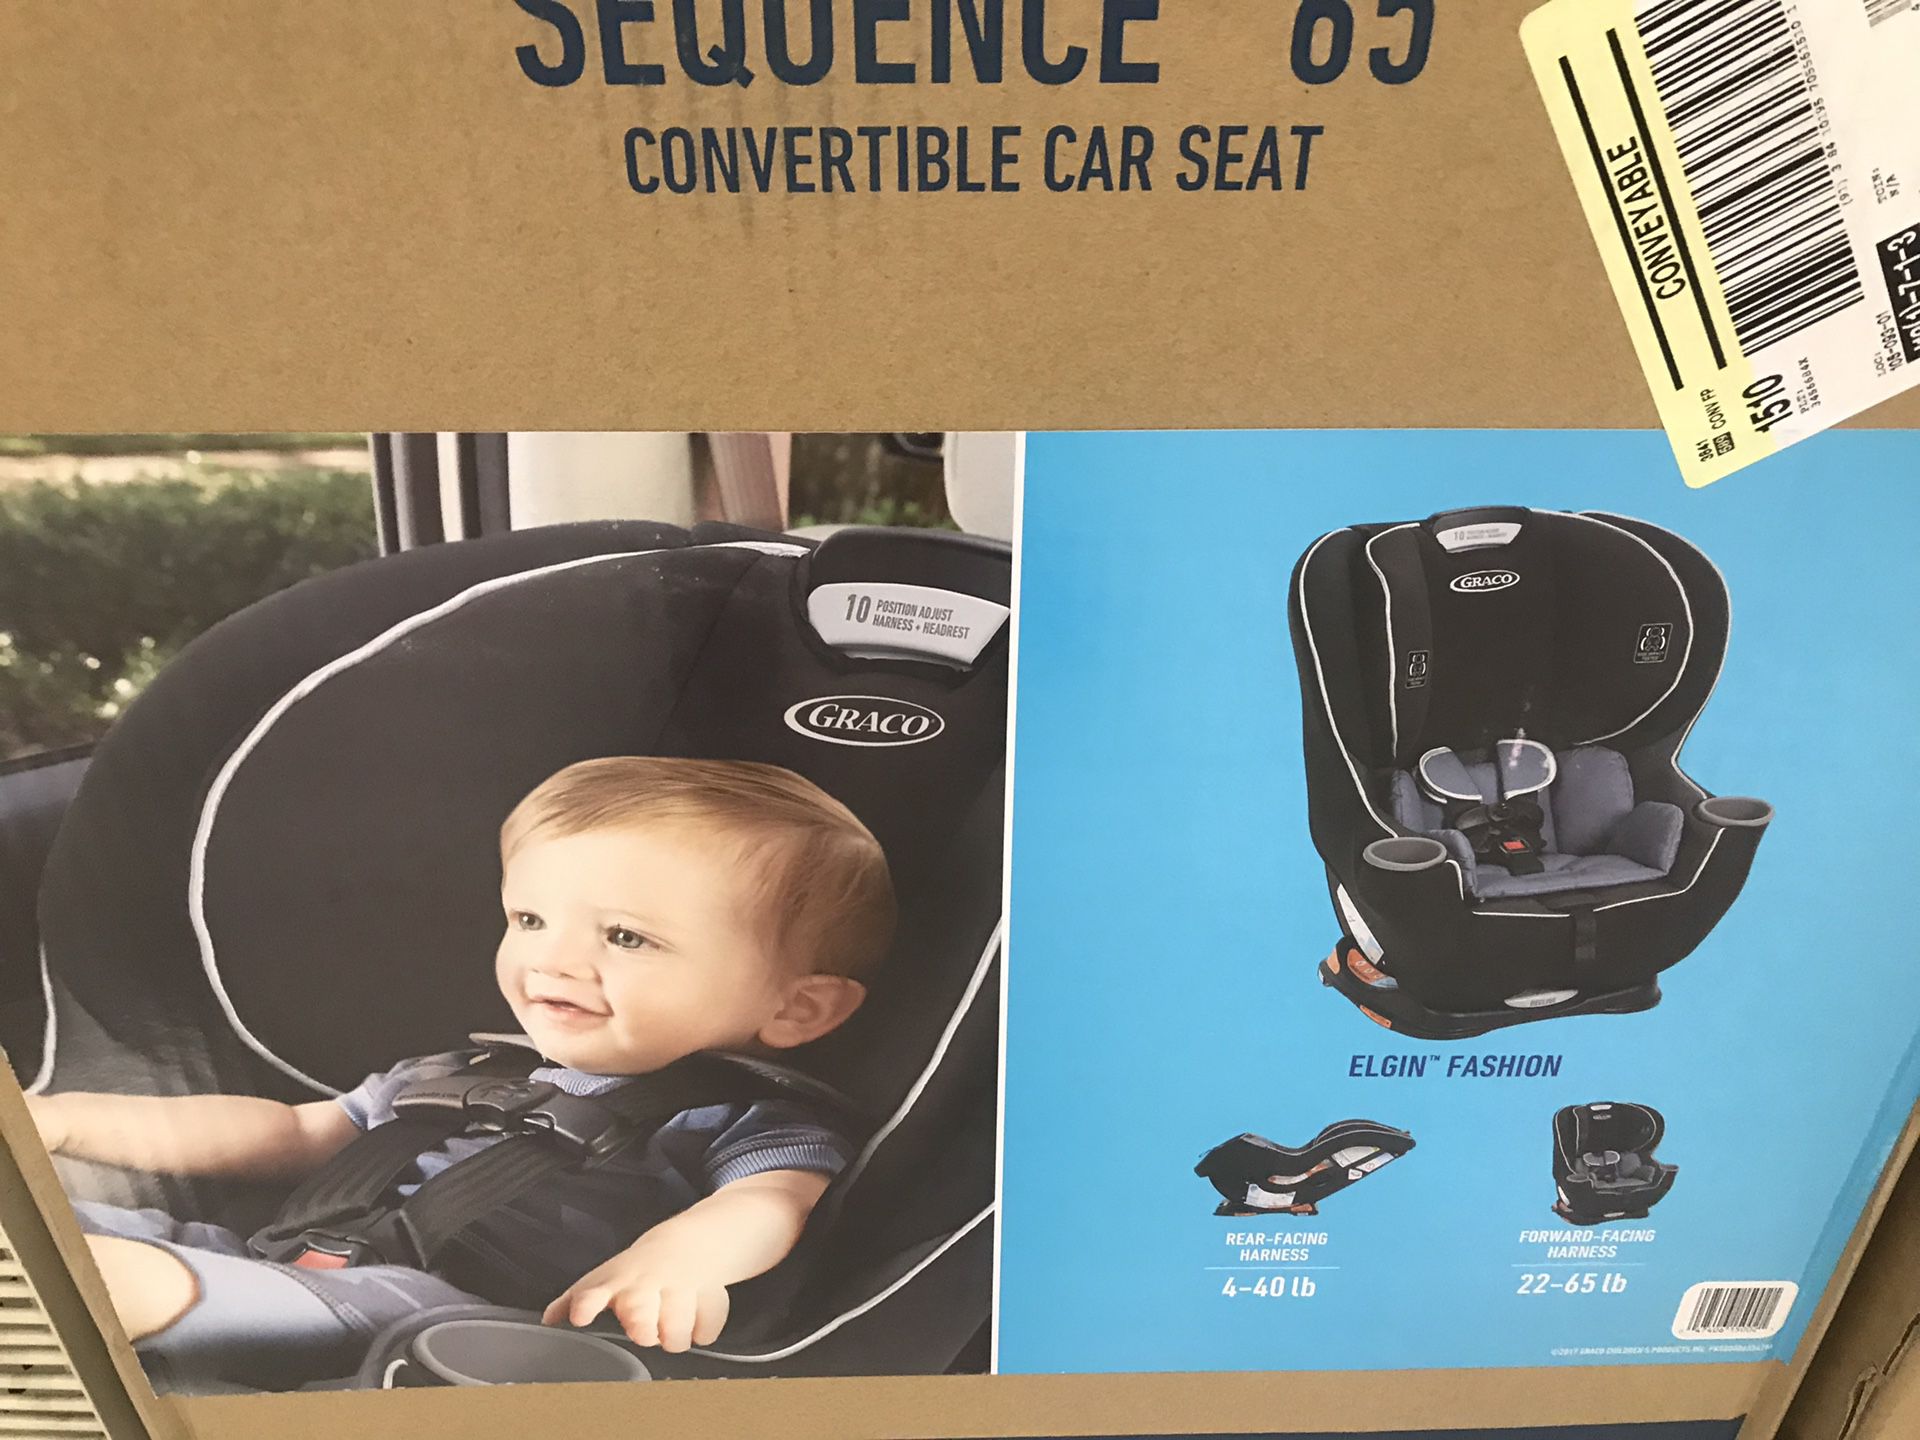 Convertible car seats one is Graco the other one Safety 1st